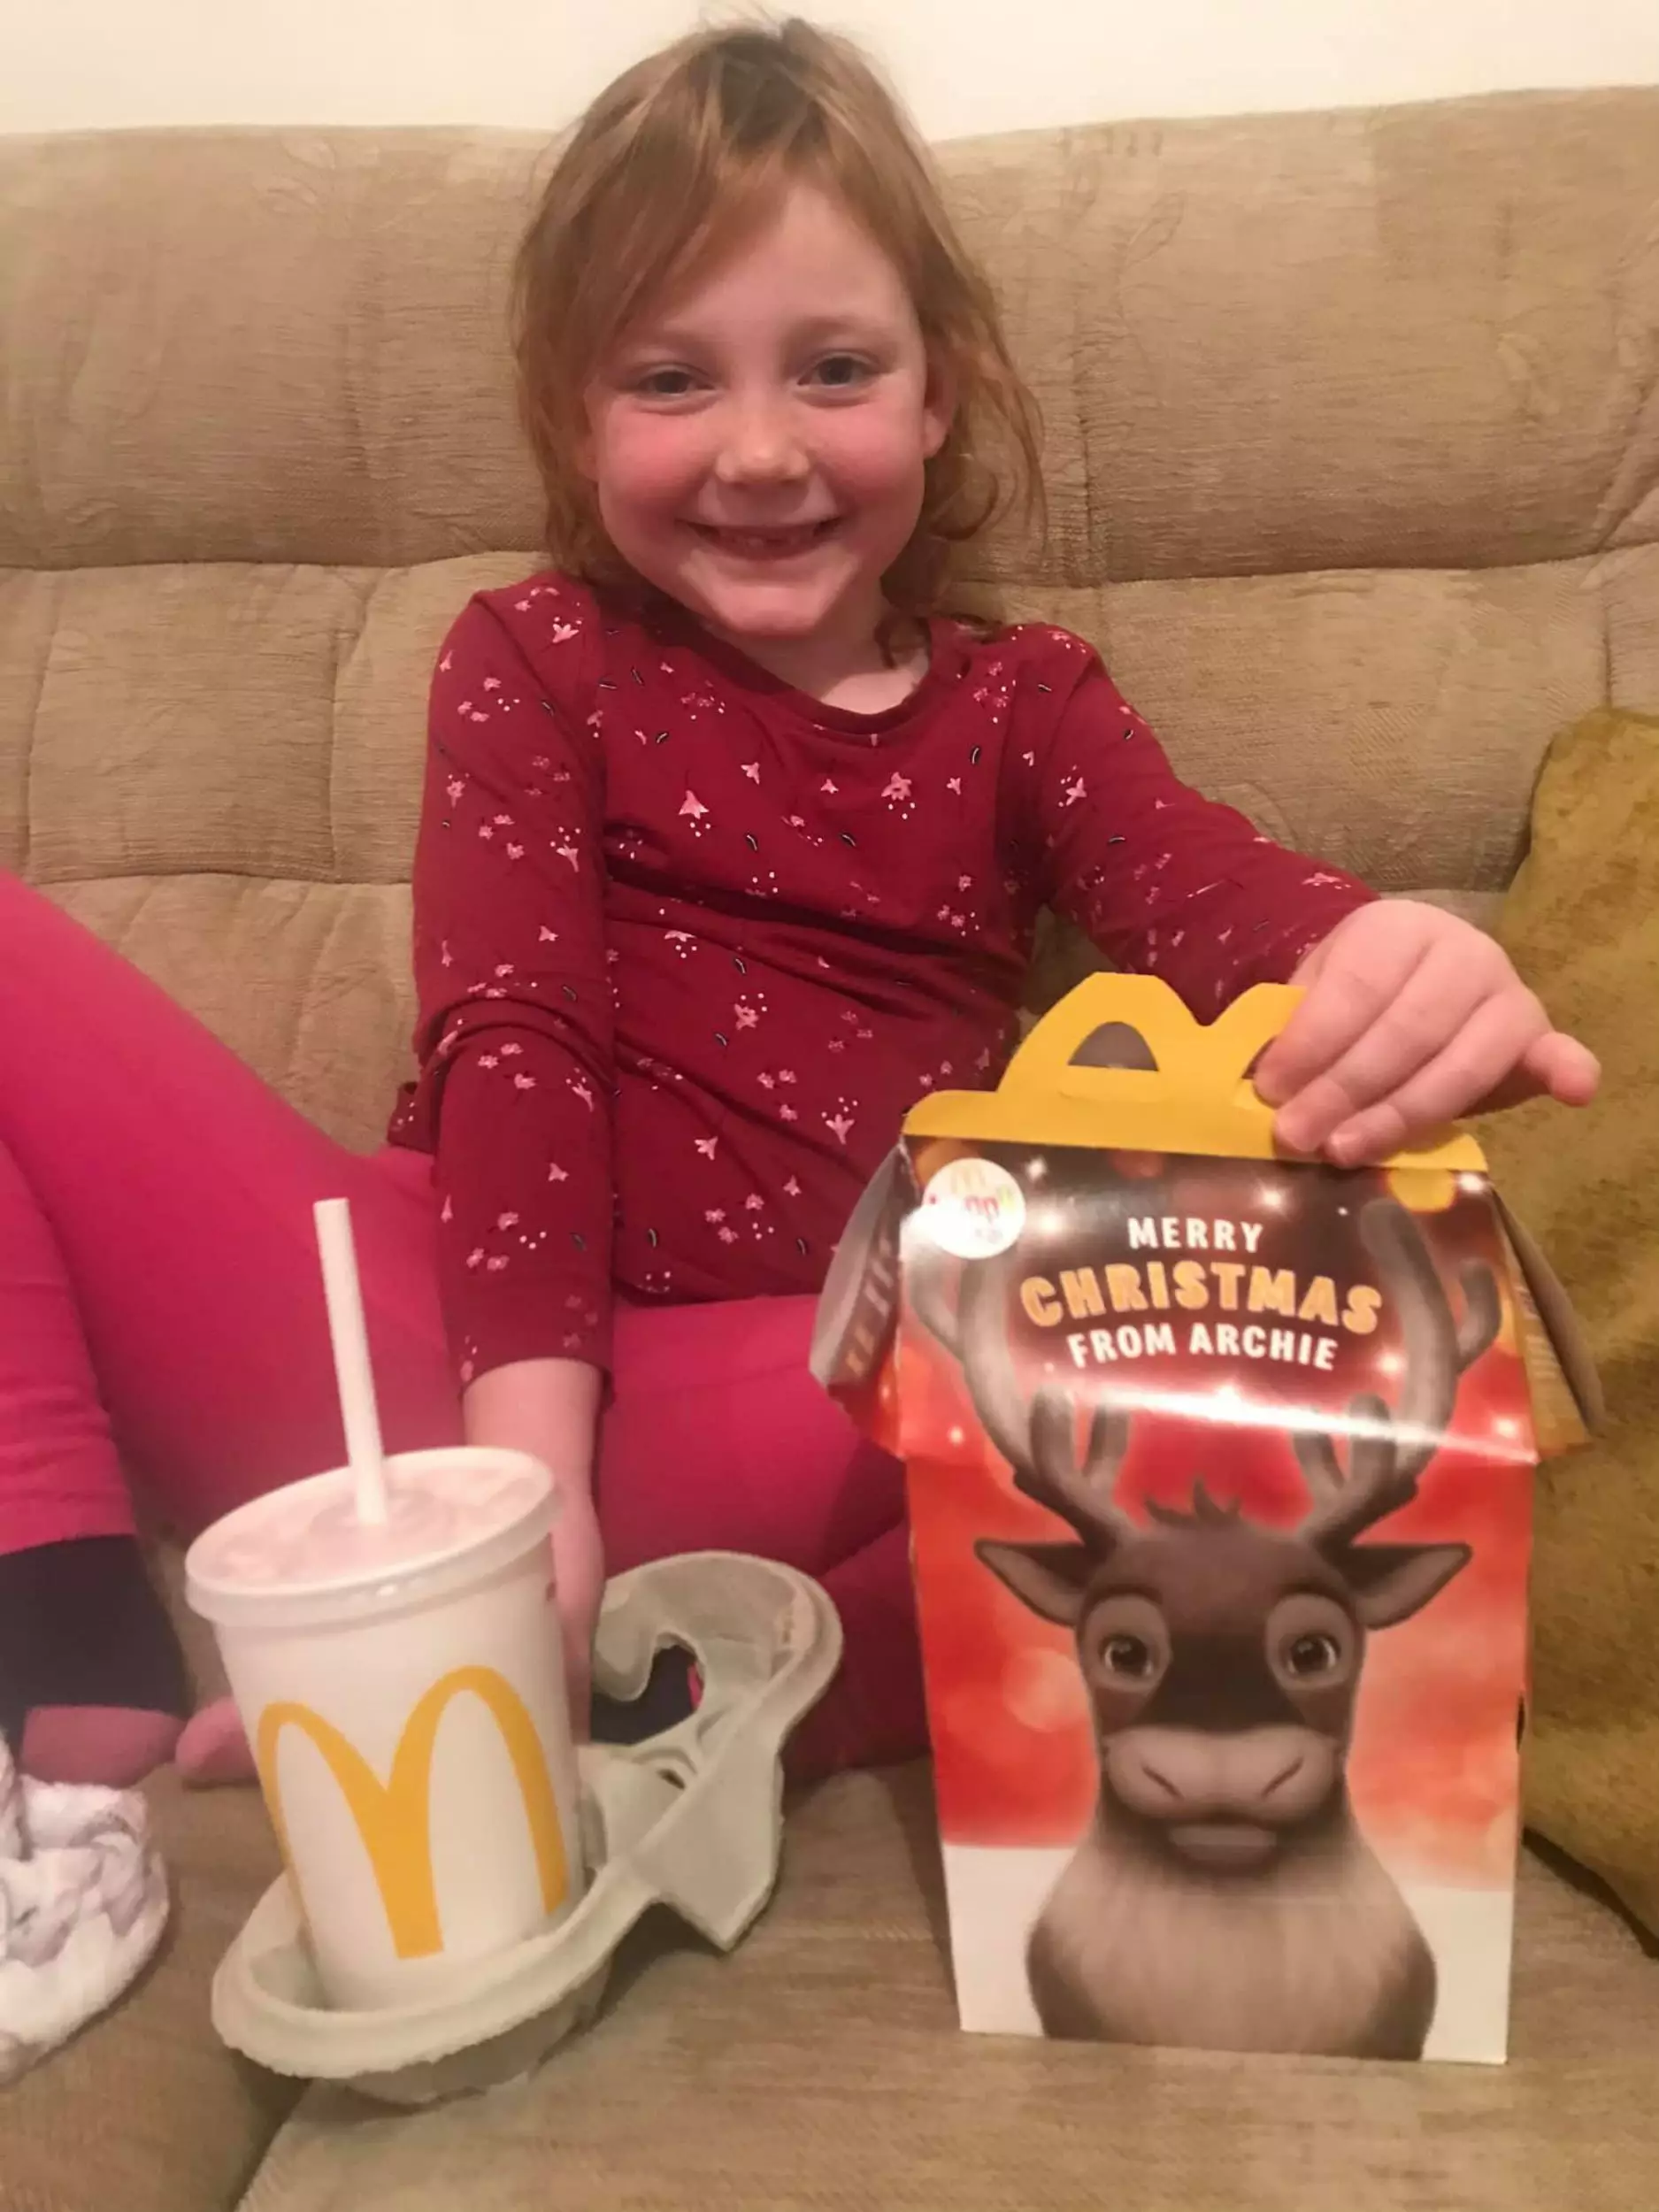 Chloe is clearly delighted with her Happy Meal.